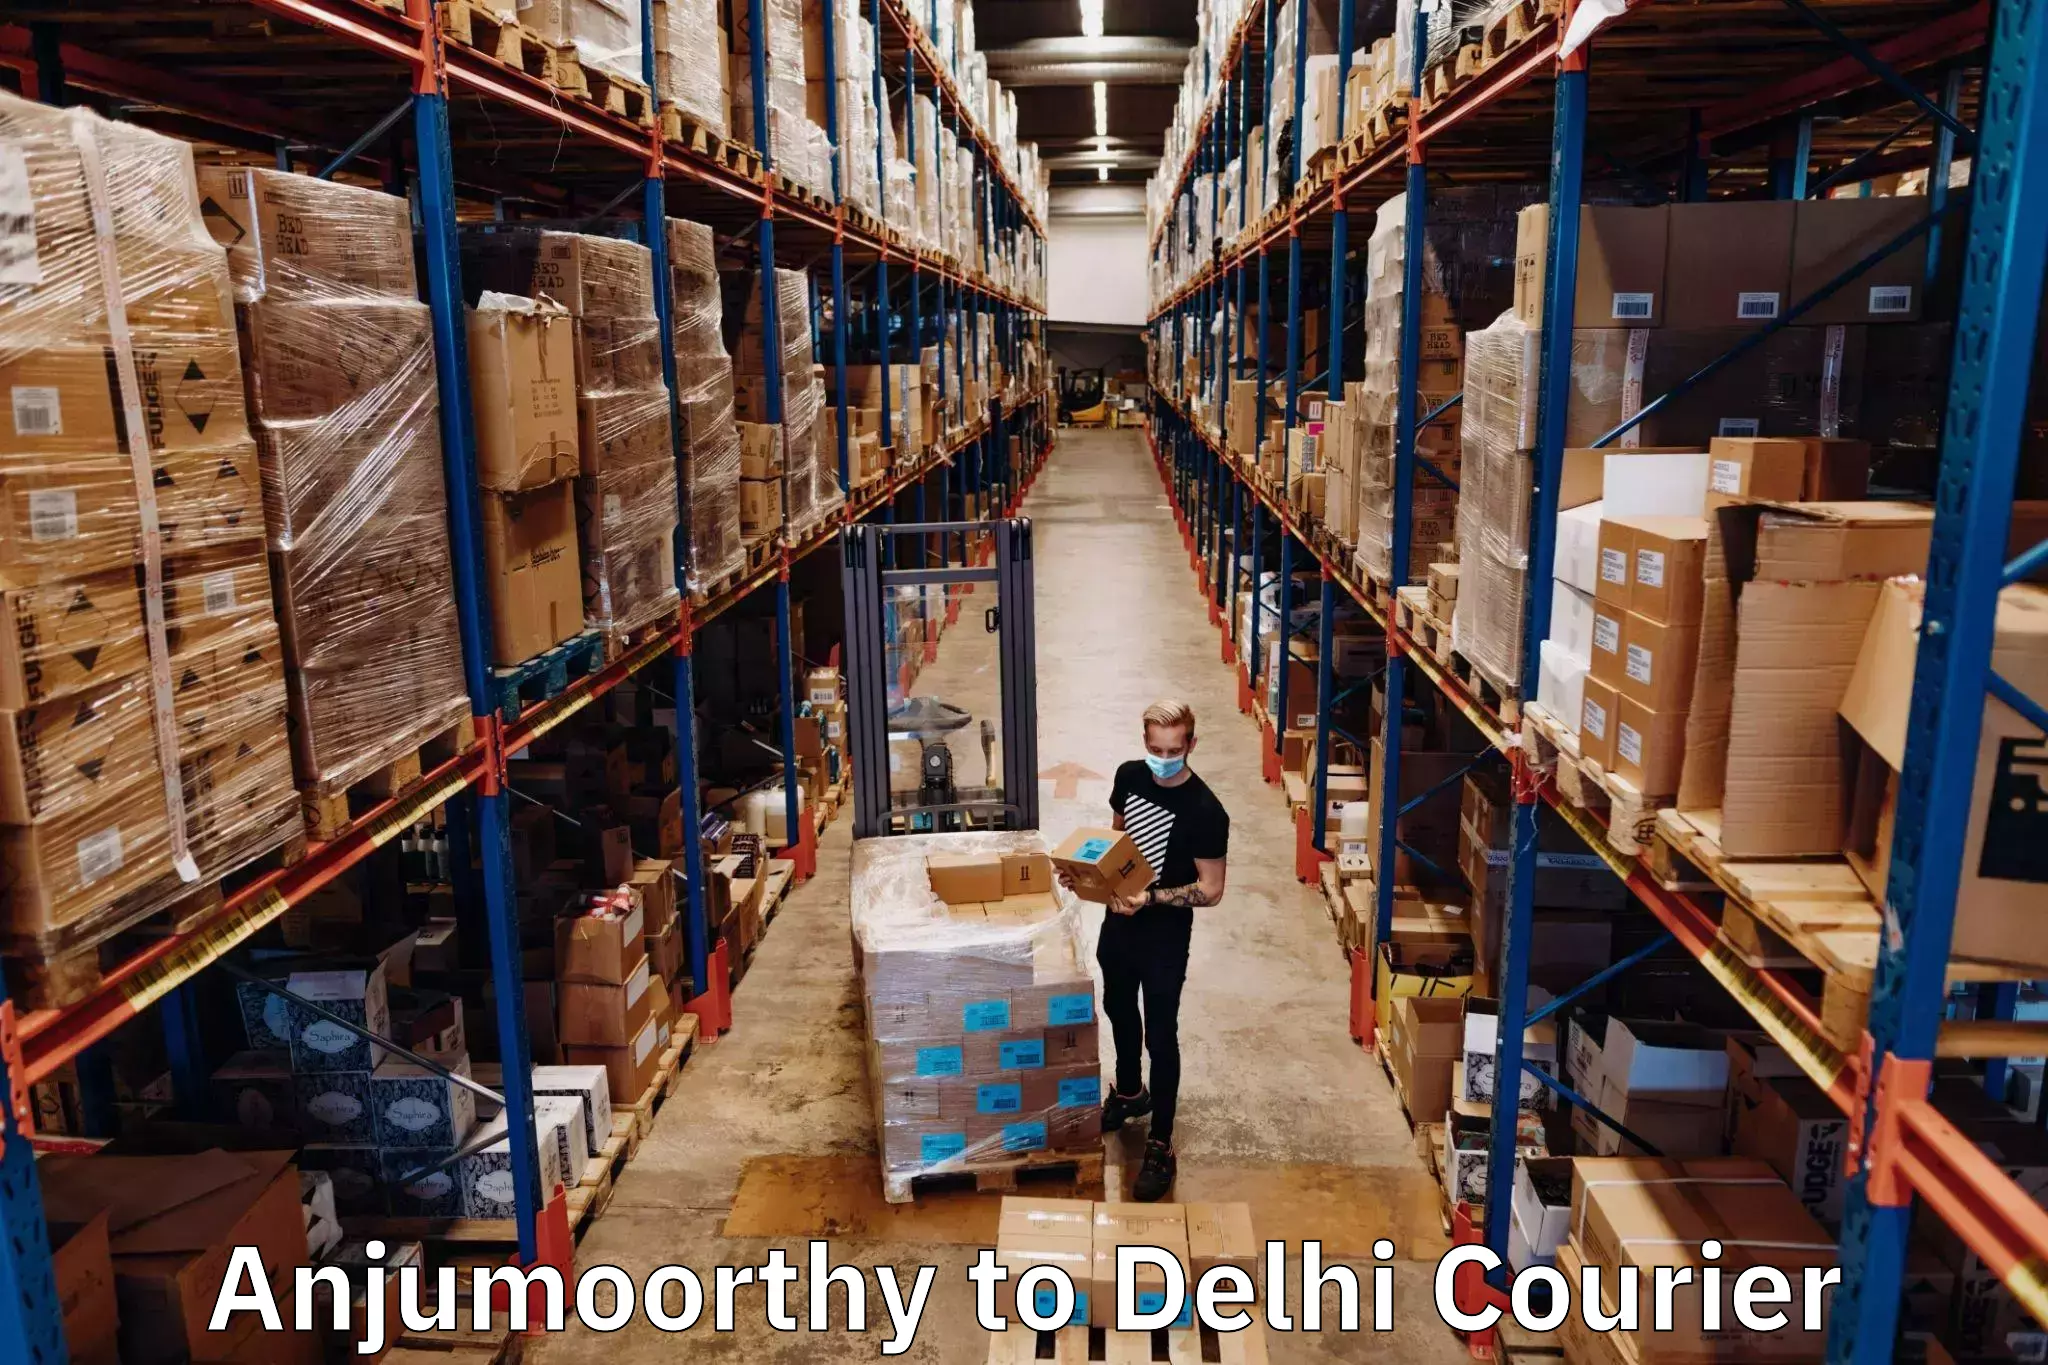 Personal parcel delivery Anjumoorthy to East Delhi